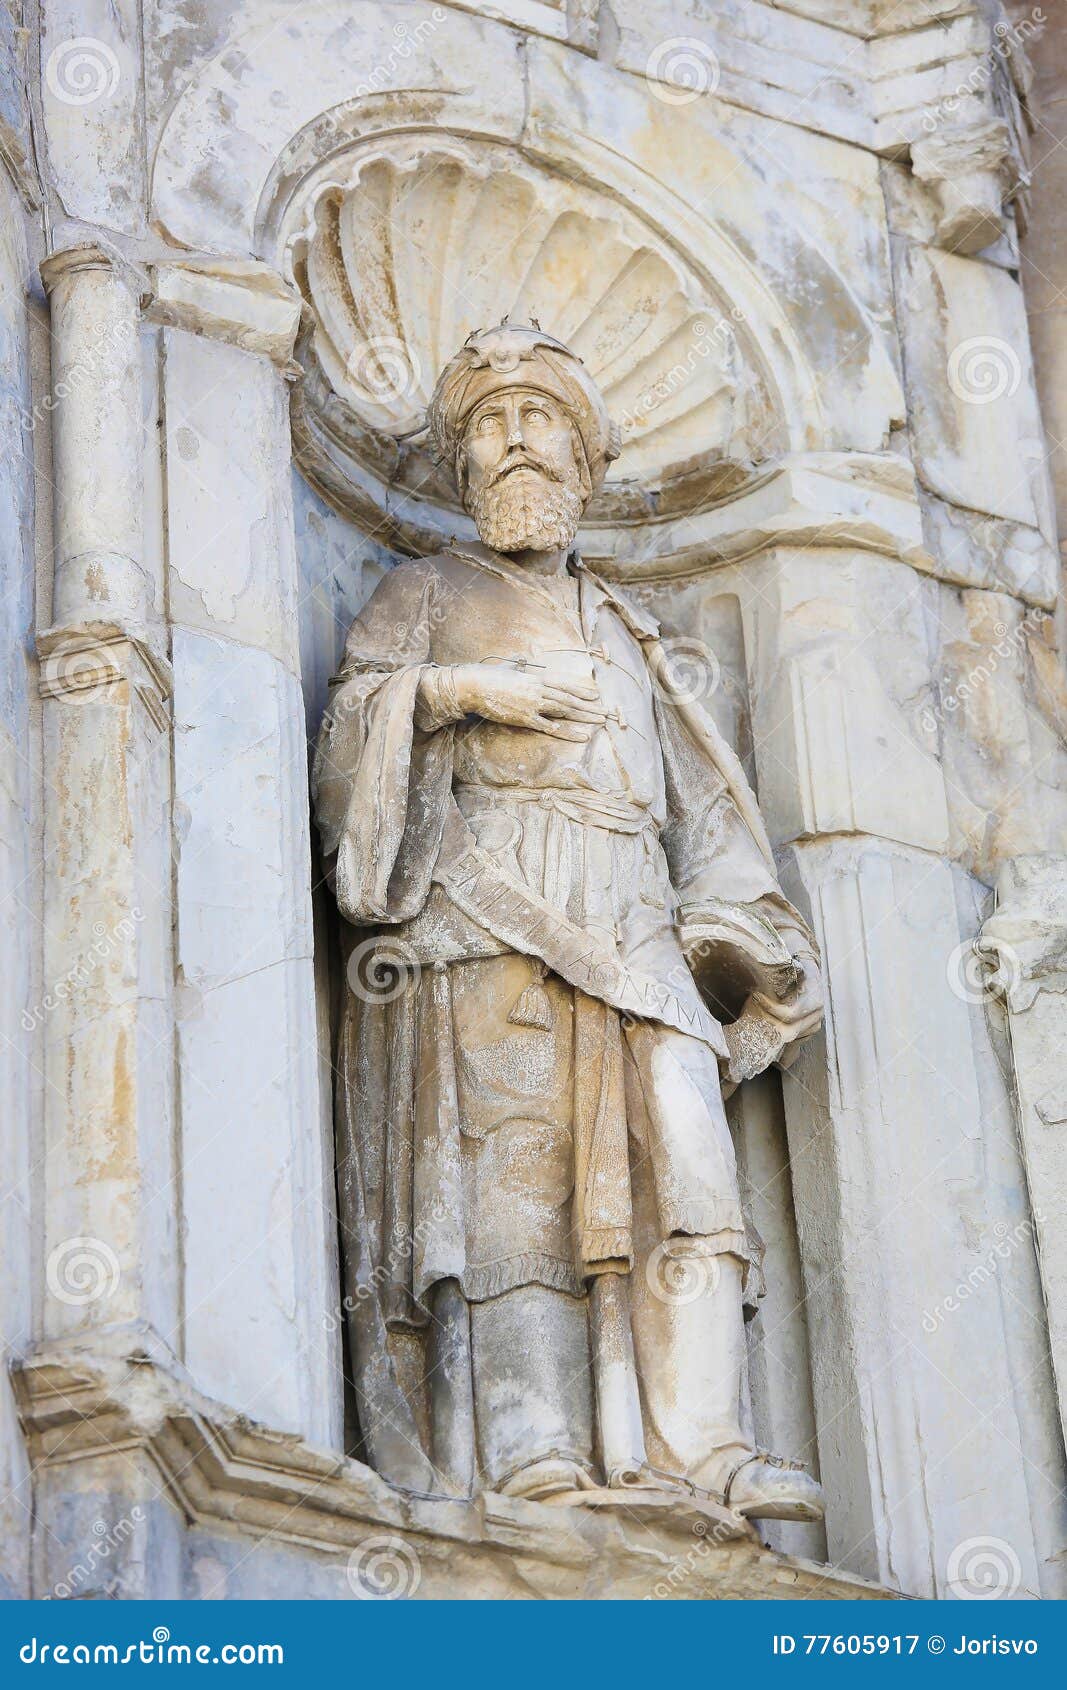 sculpture of a saint at se velha or old cathedral, coimbra